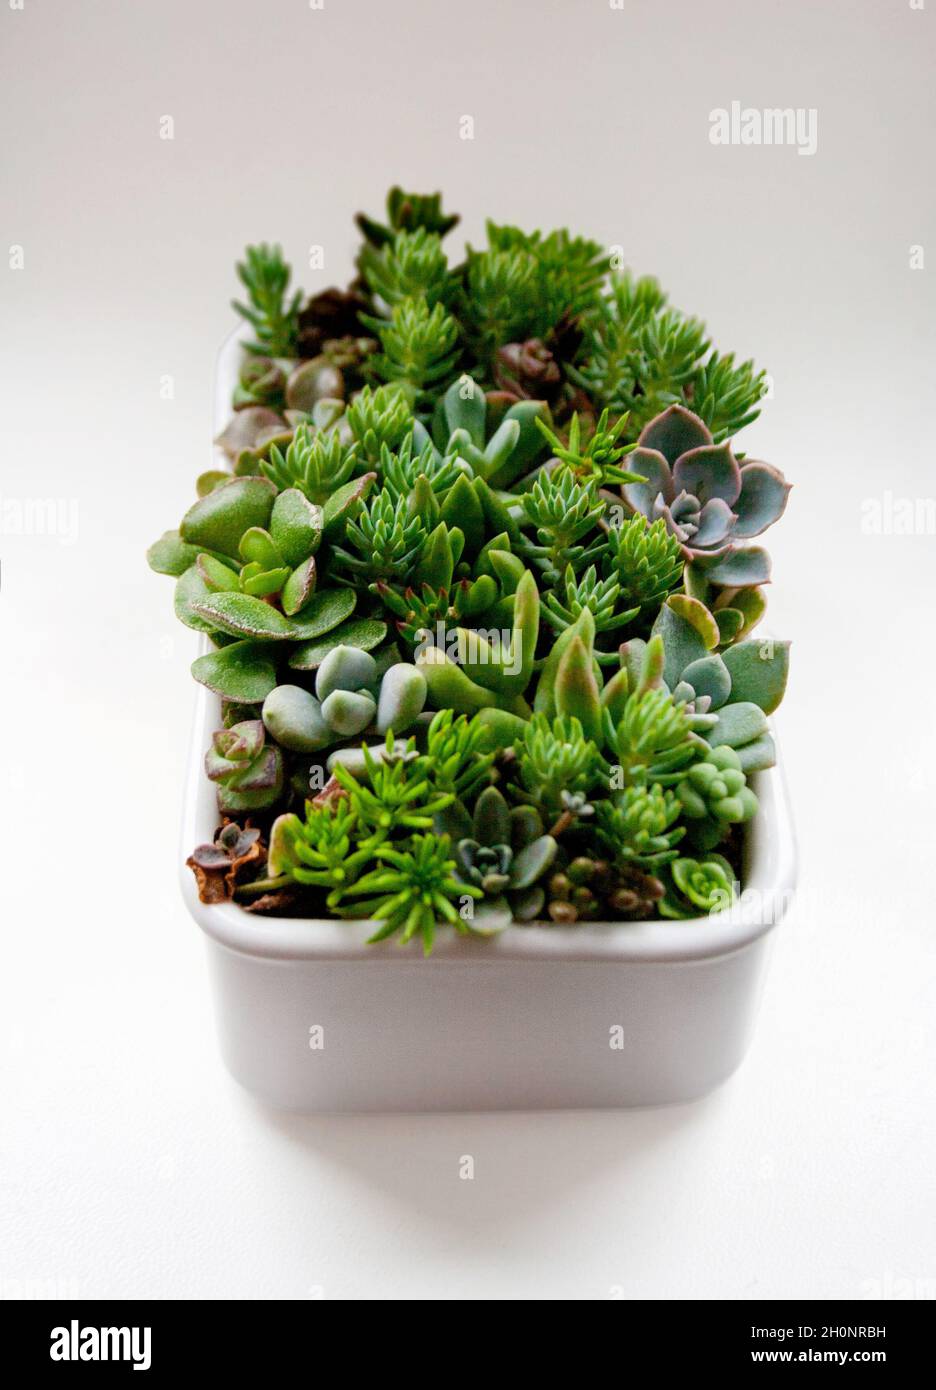 Small succulents garden in ceramic planter isolated on white background Stock Photo